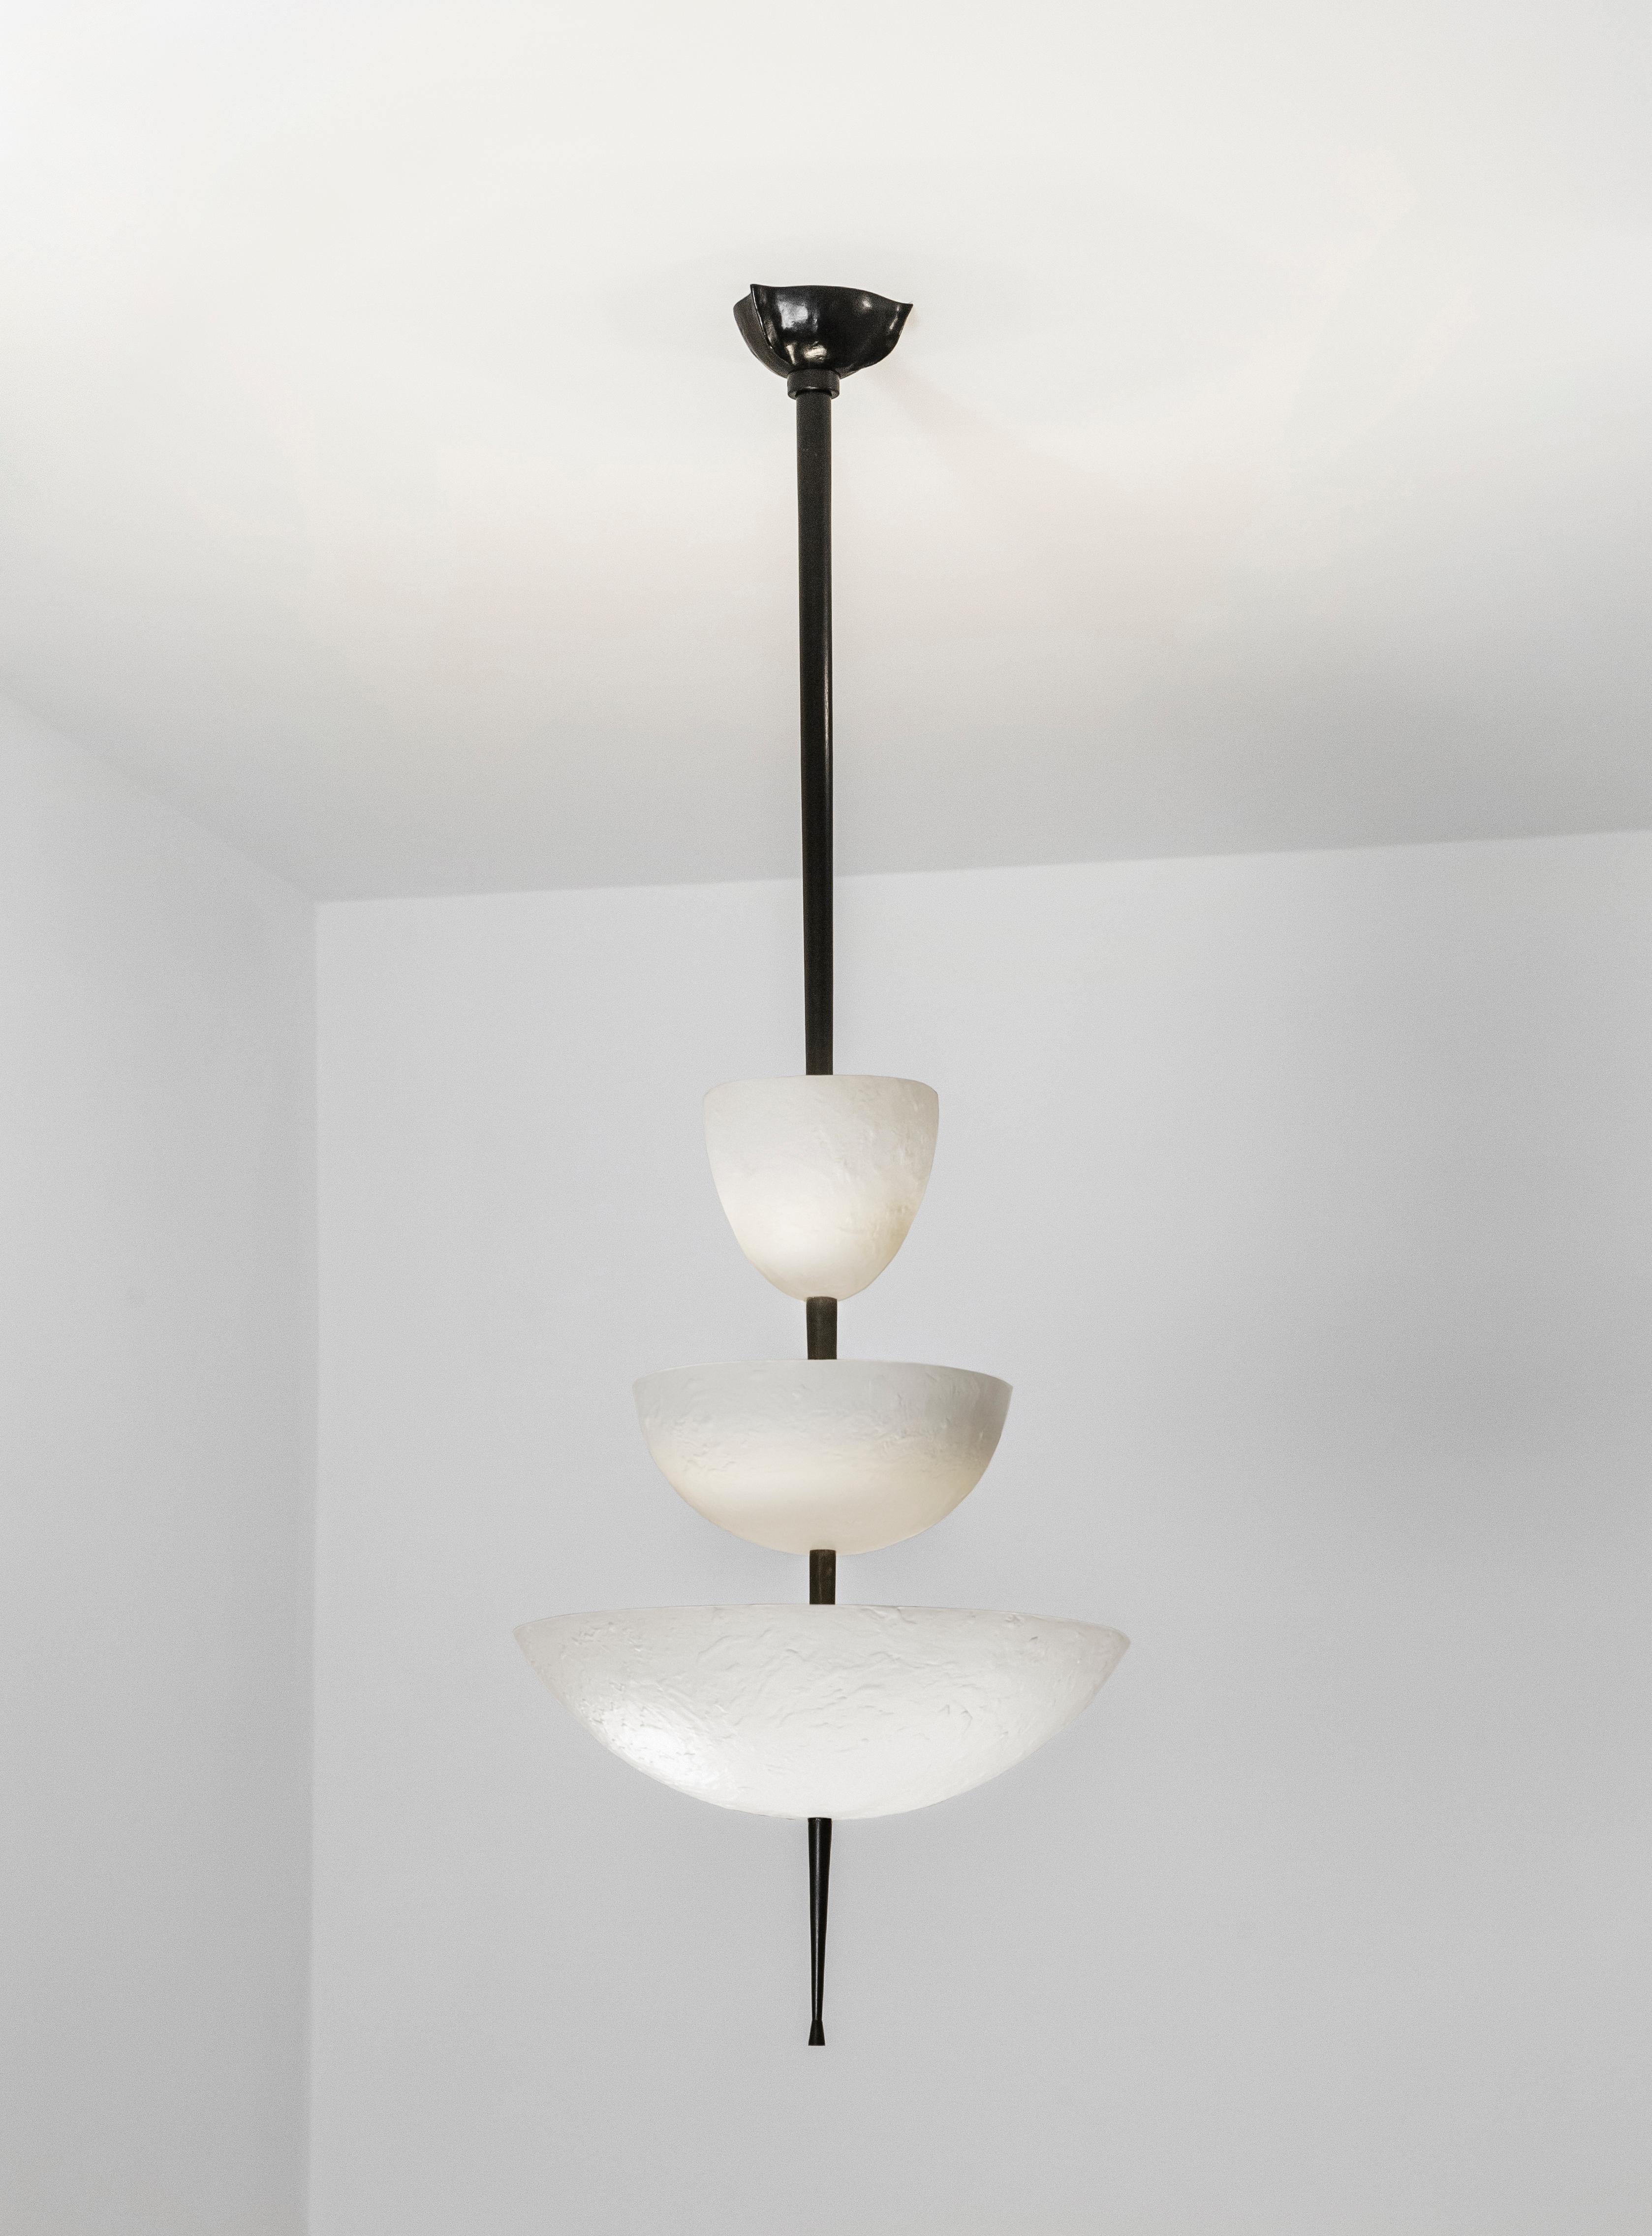 Achille Salvagni
Simposio white chandelier
2017
Cast bronze chandelier in a white finish with burnished bronze stem. This chandelier is named after Plato's Symposium, a praise to Eros, God of Love and Desire, and its unique texture is inspired by